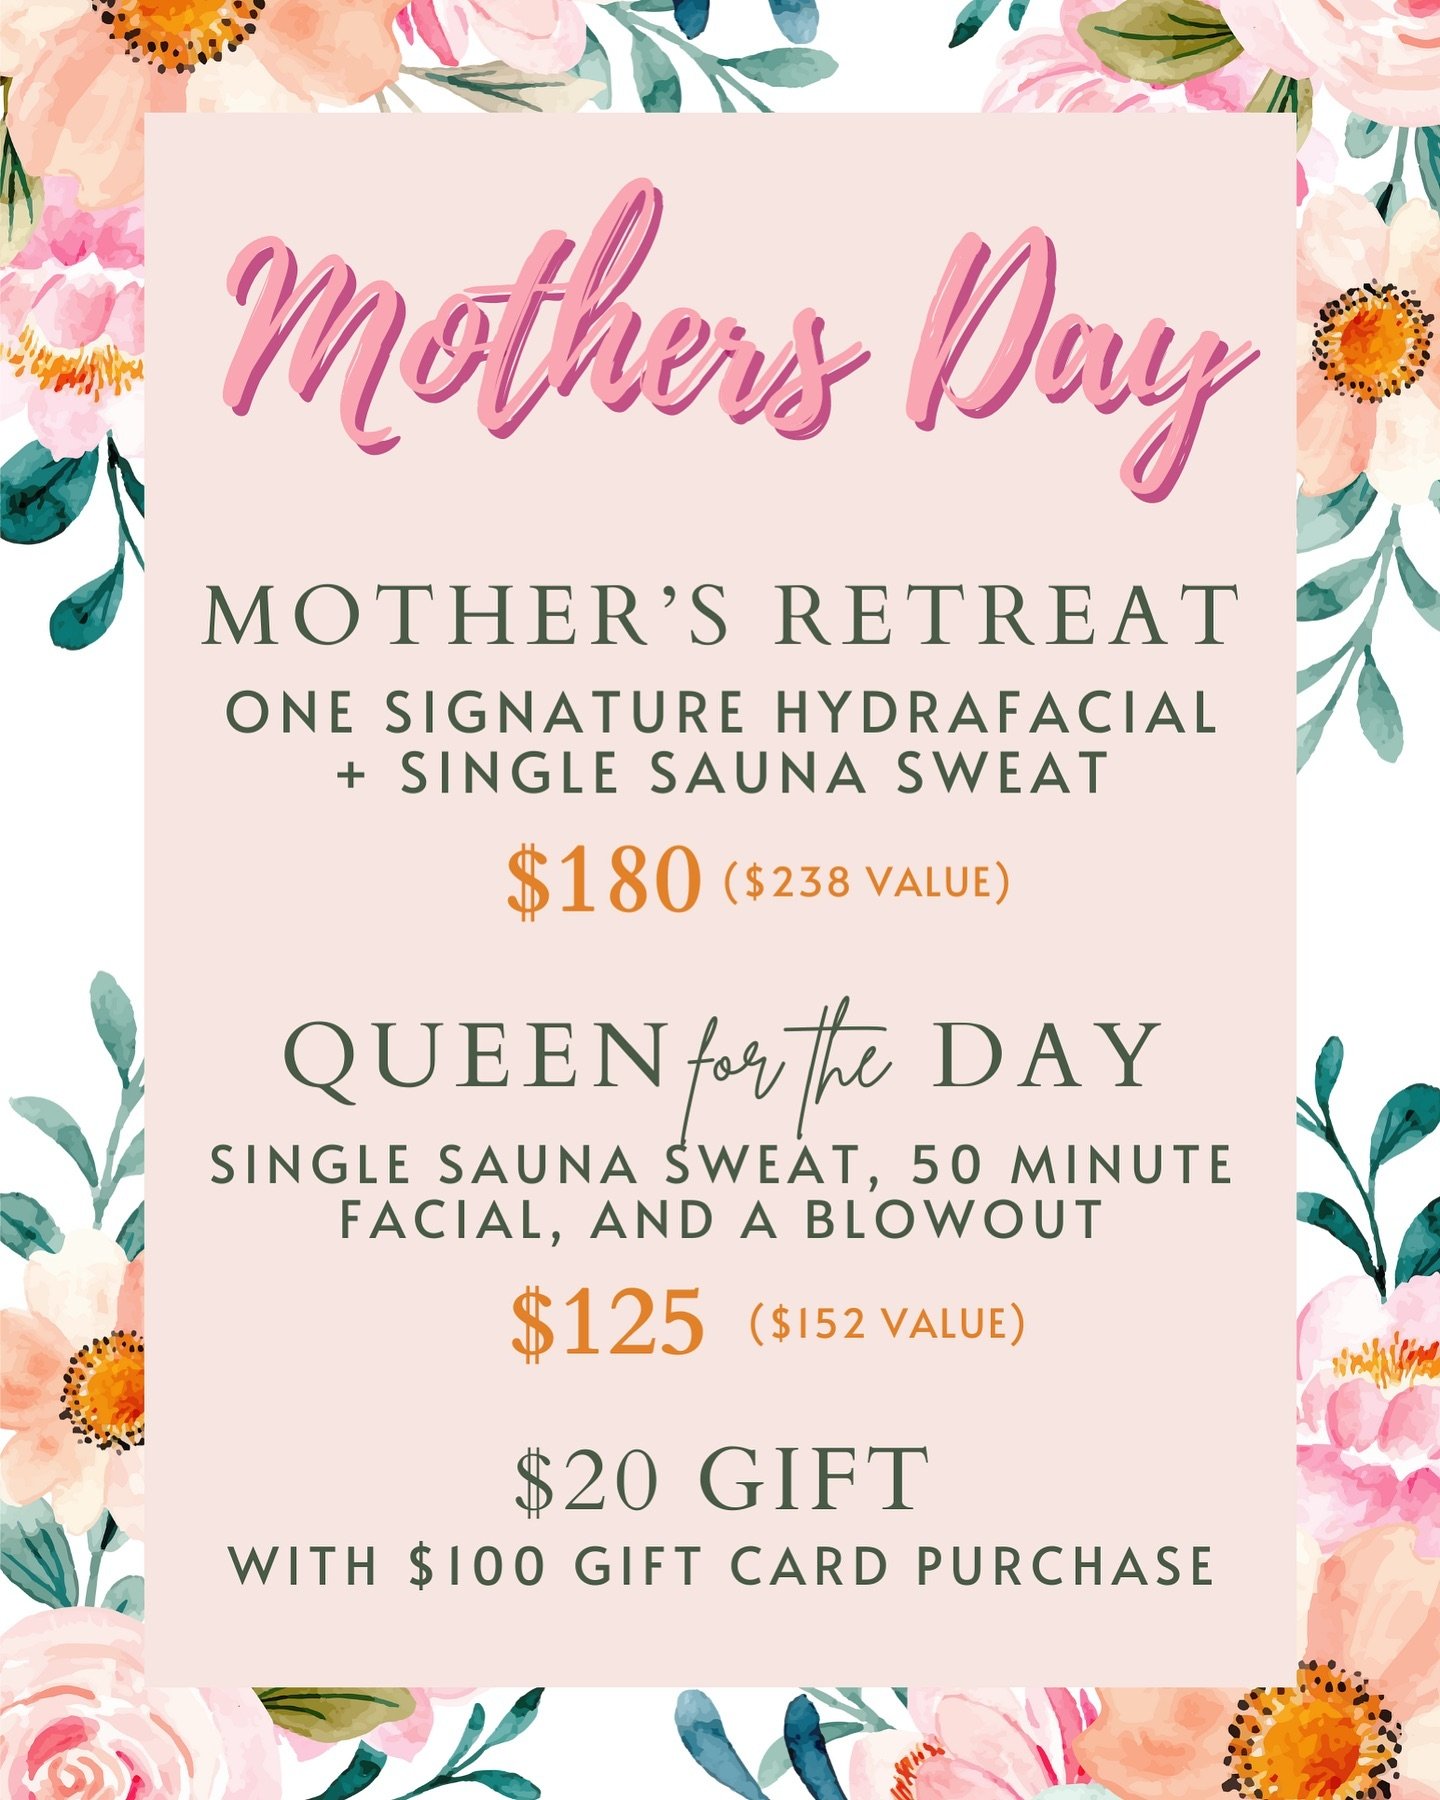 Treat the special woman (or women) in your life to an unforgettable Mother&rsquo;s Day with our exclusive packages designed to pamper &amp; indulge ✨
Get yours in-salon or purchase online